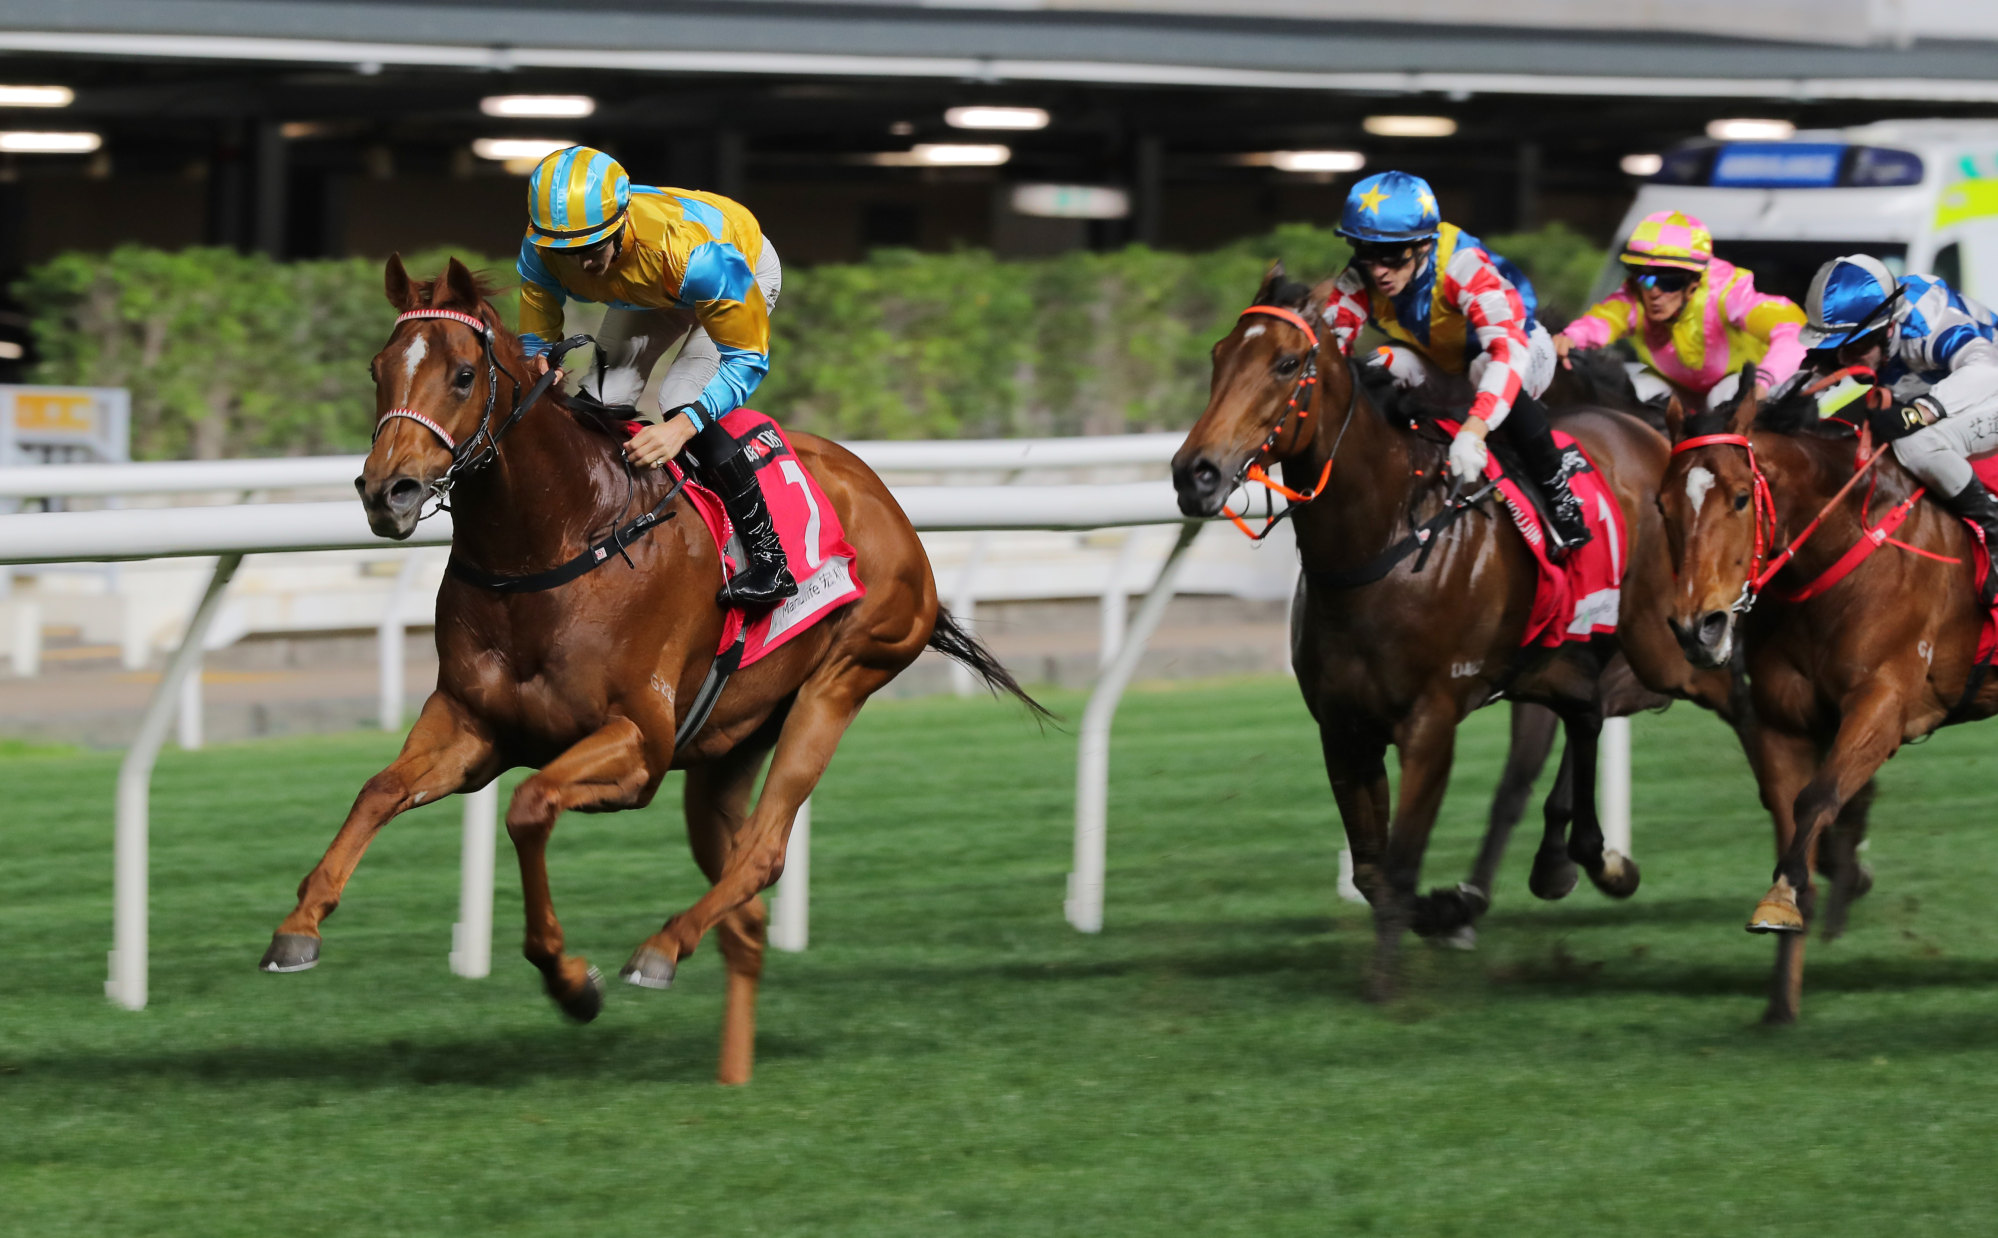 Mr Ascendency surges clear to win at Happy Valley.